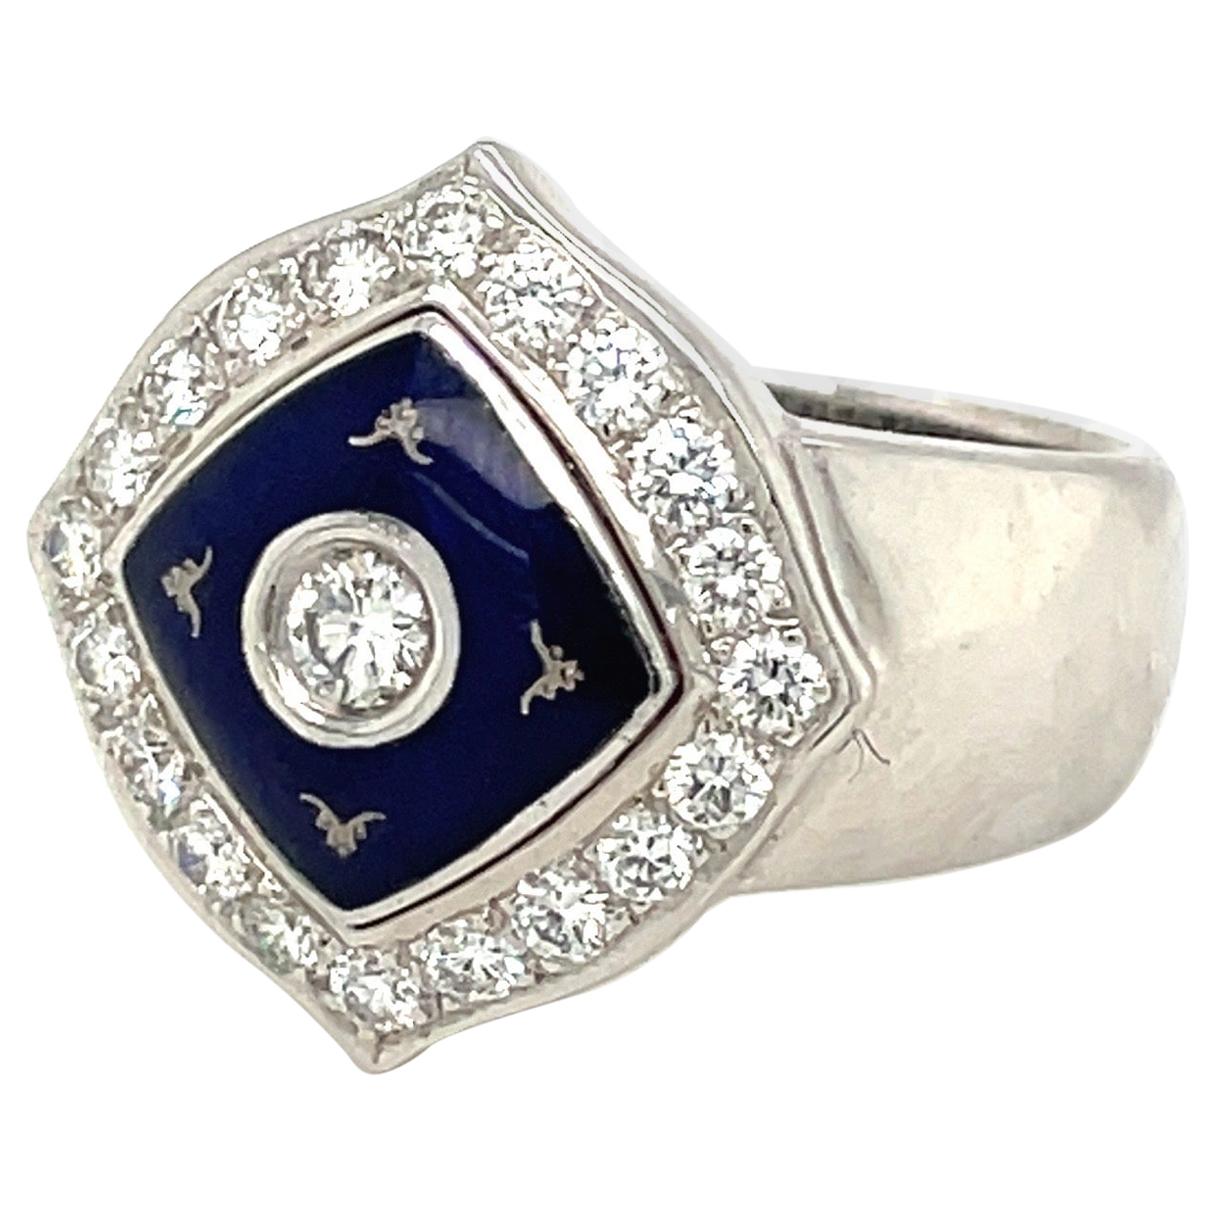 Faberge 18KT White Gold Diamond 0.66 Carat & Blue Enamel Ring, with Certificate For Sale